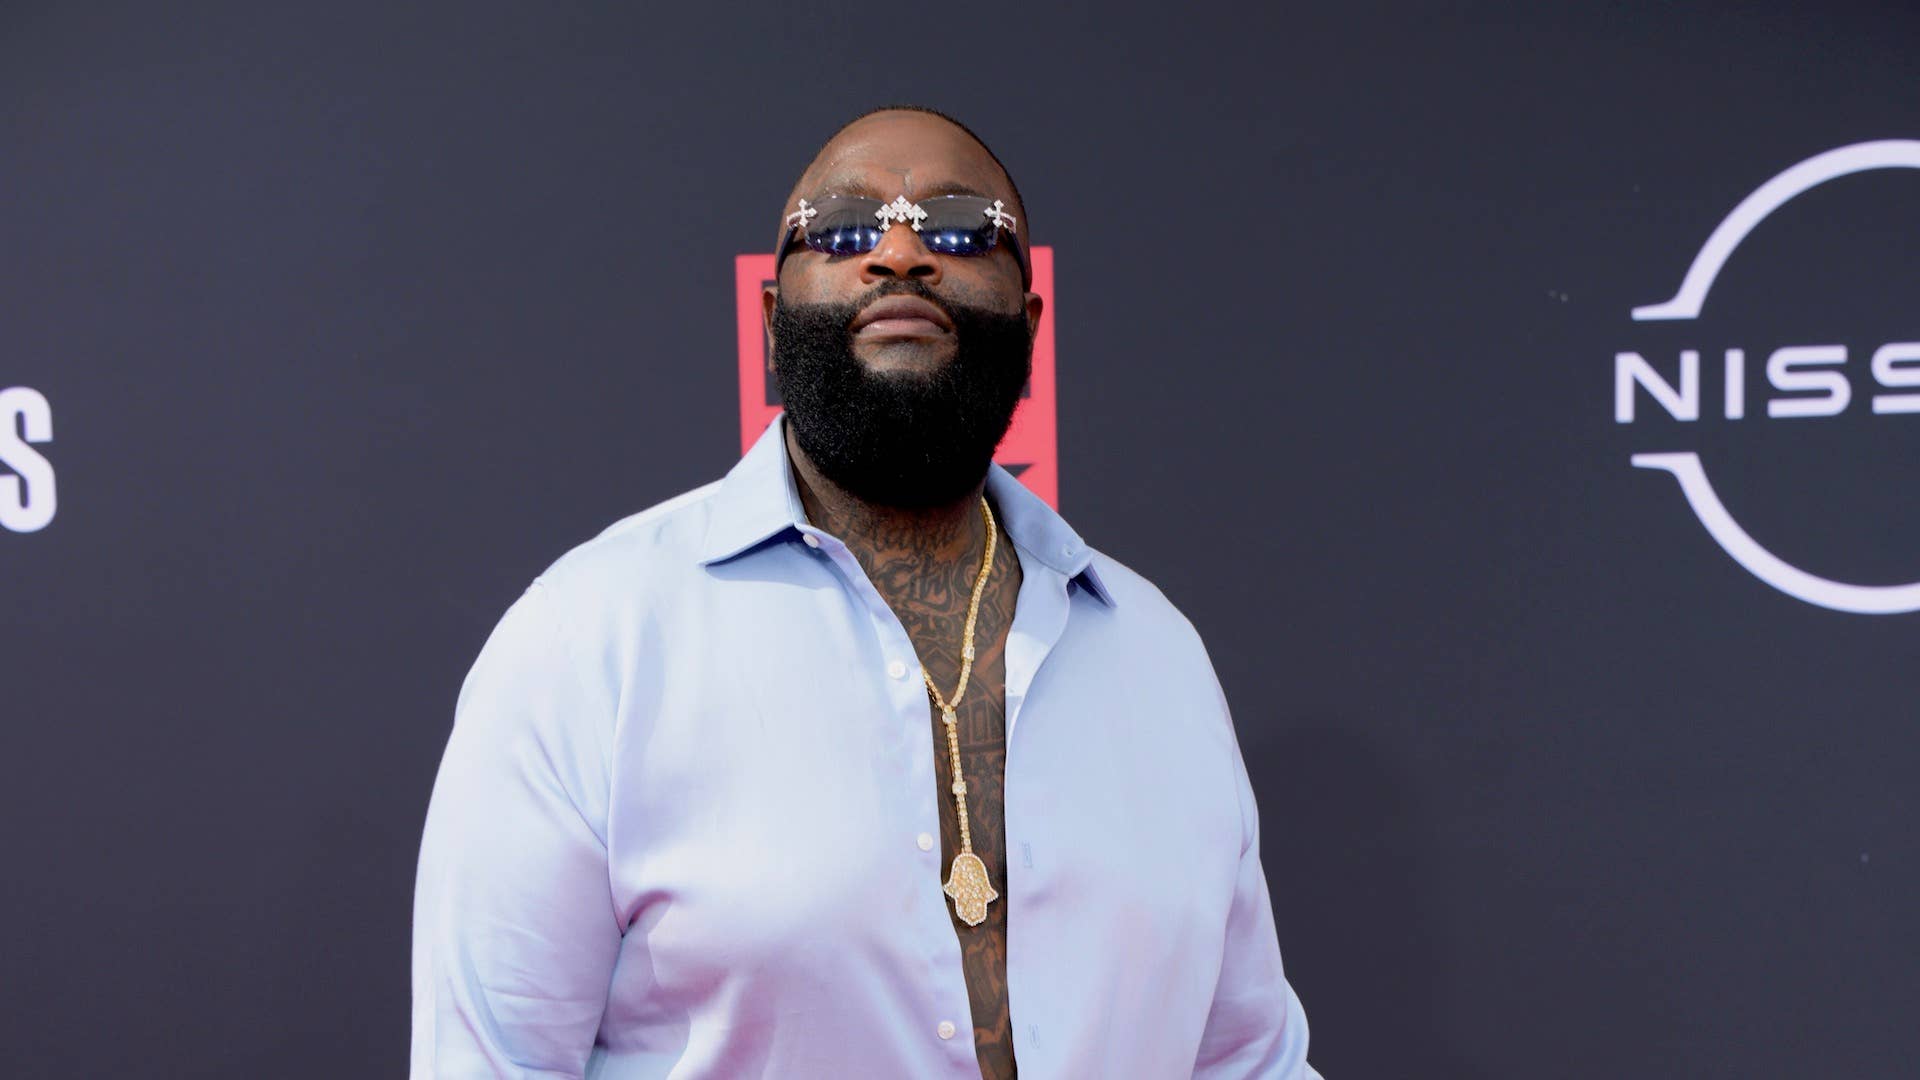 Rick Ross attends the 2022 BET Awards at Microsoft Theater